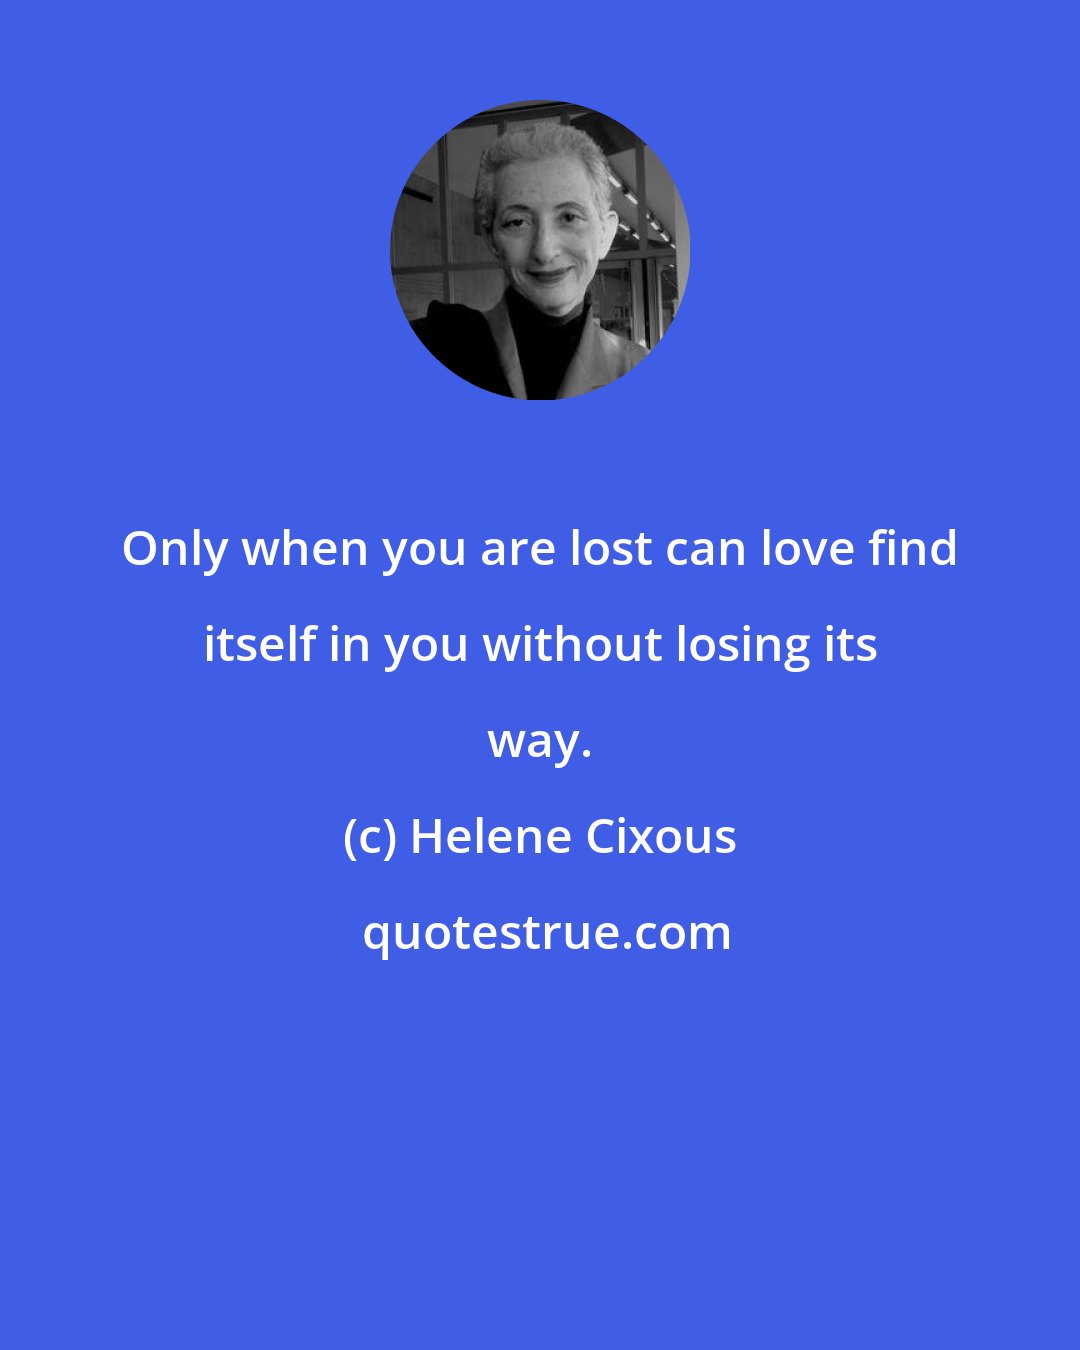 Helene Cixous: Only when you are lost can love find itself in you without losing its way.